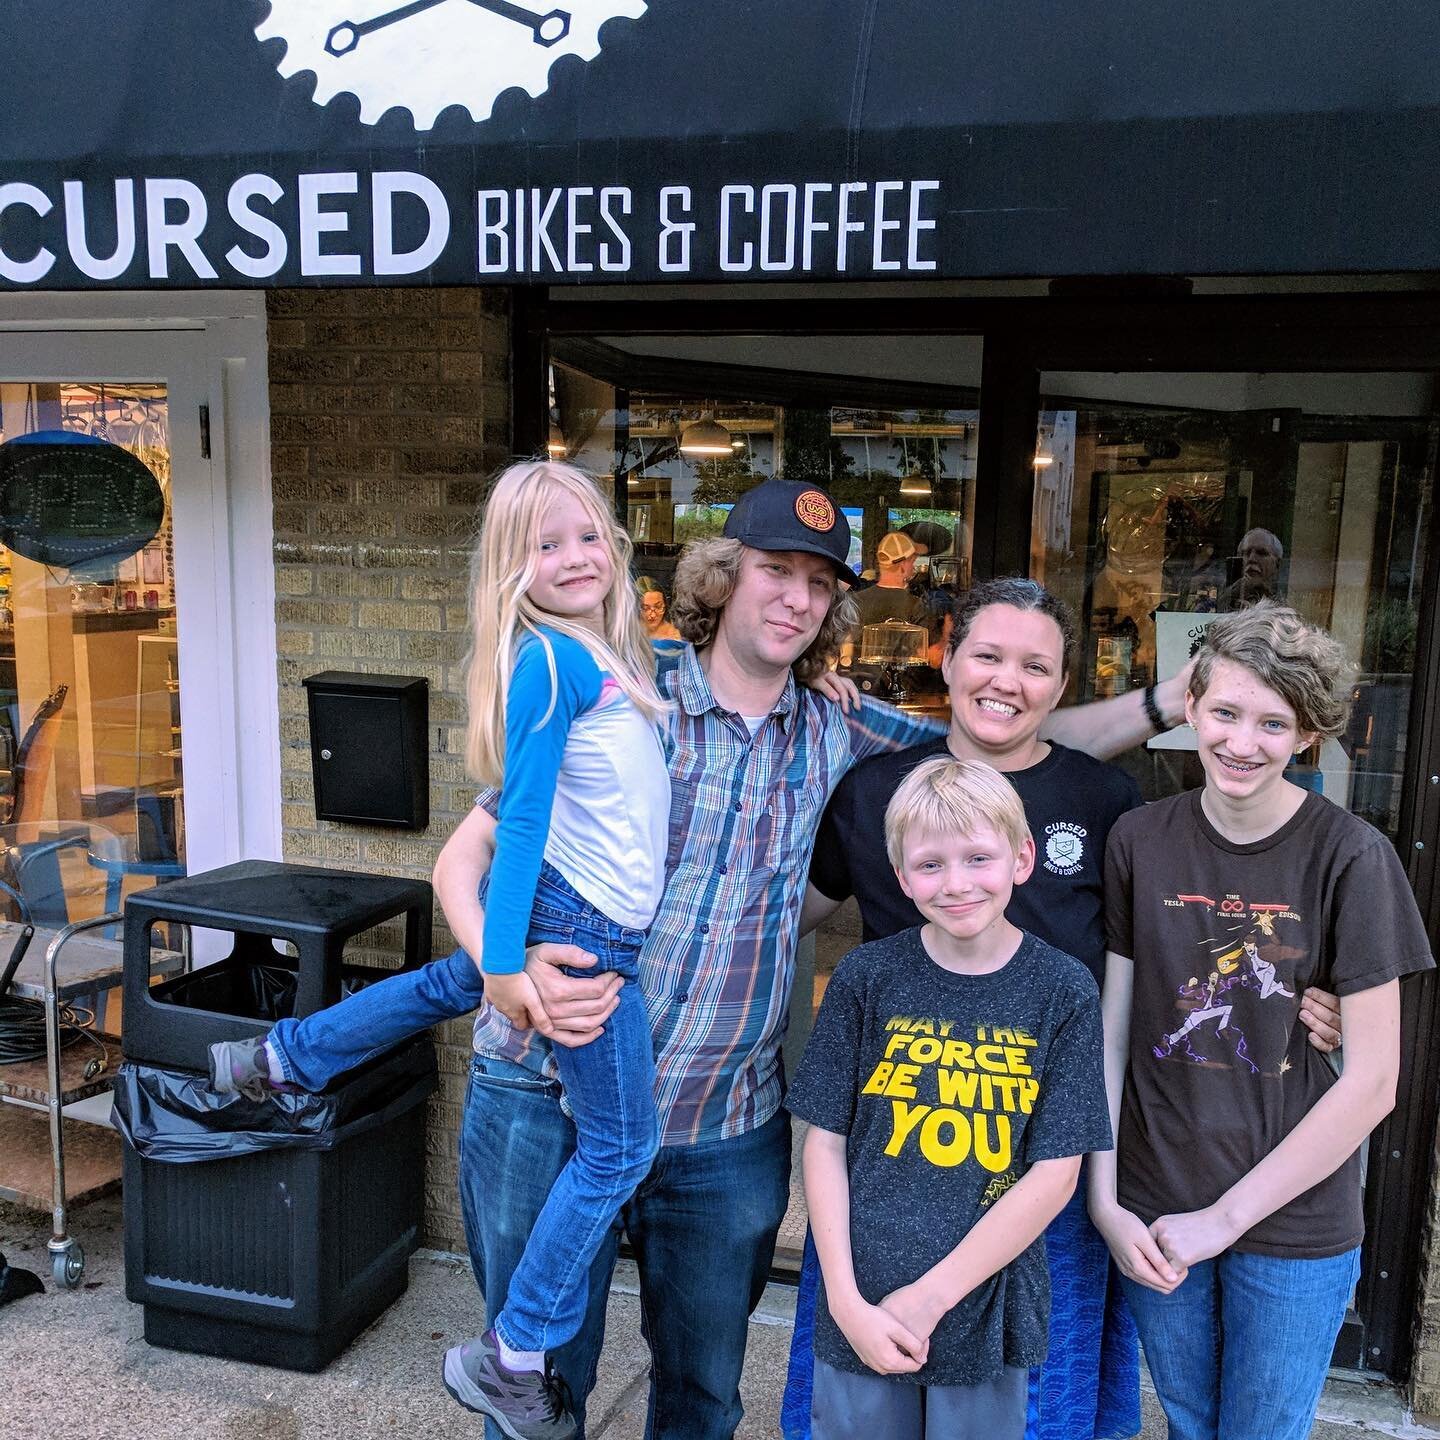 The Becker family is proud to announce that A&amp;M officially is under new ownership! Jeff and Erin Gerhardt, who are the owners of Cursed Bikes and Coffee, are excited to continue A&amp;M as one of the oldest bike shops in the Saint Louis area. In 